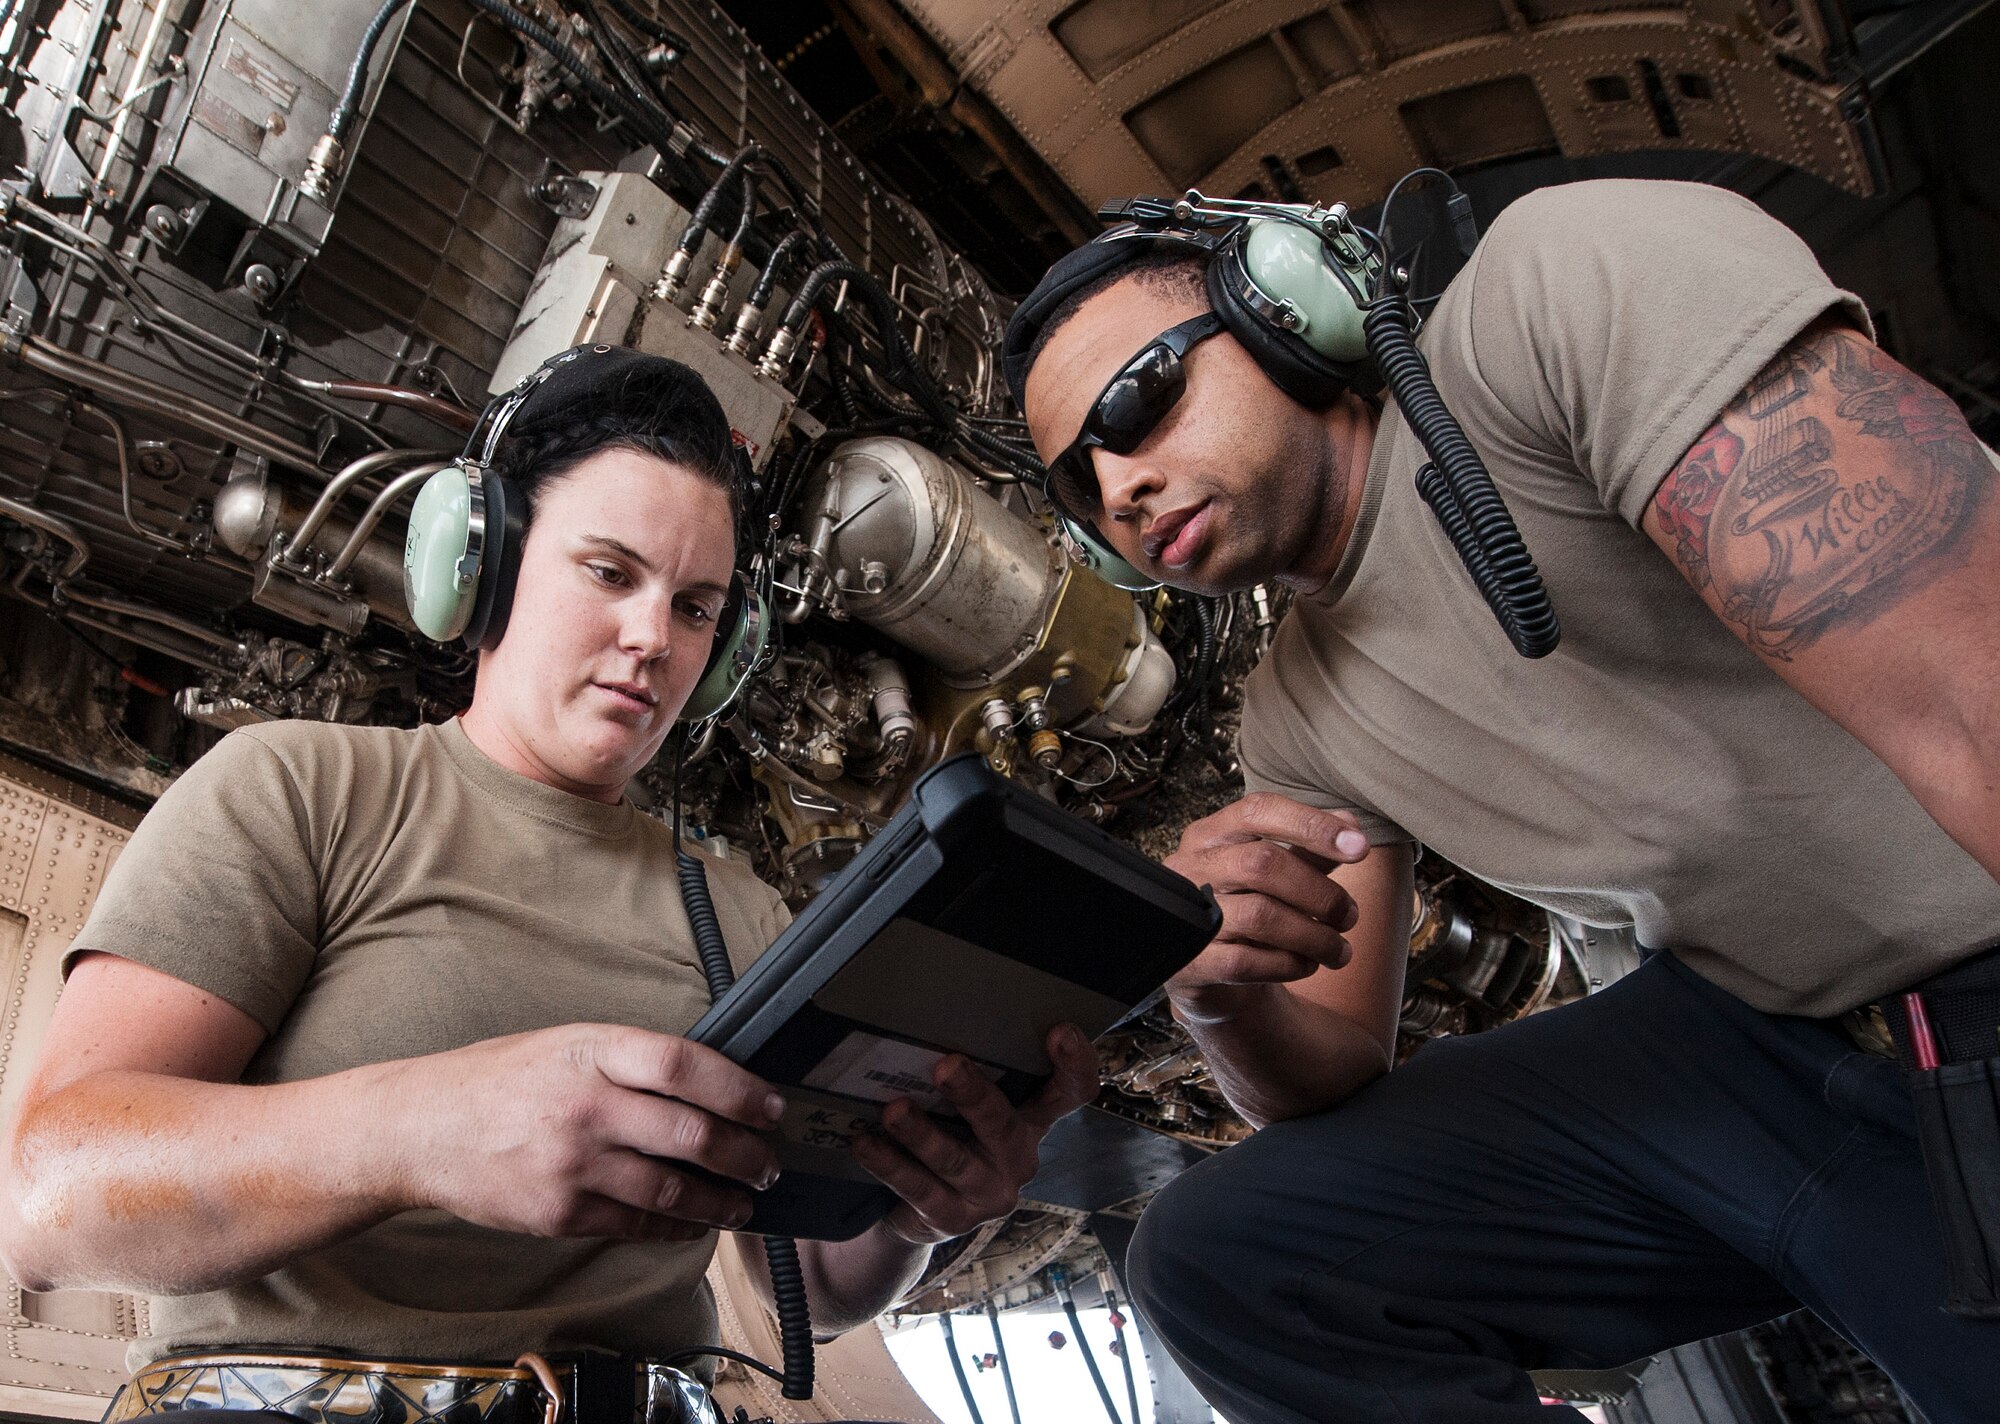 Airman 1st Class Shelby Ries, left, 379th Expeditionary Aircraft Maintenance Squadron (EAMXS) B-1B Lancer propulsion apprentice, and Staff Sgt. Jason Blackmon, 379th EAMXS B-1B Lancer propulsion craftsman, review technical orders while conducting routine maintenance for a B-1B Lancer Dec. 22, 2018, at Al Udeid Air Base, Qatar. Due to Ries’s exceptional performance she was selected to deploy to Al Udeid as an area of responsibility (AOR) advanced echelon (ADVON) team member. Ries led two engine changes and more than 90 maintenance actions which resulted in 56 B-1B sorties, totaling 672 flying hours. (U.S. Air Force photo by Tech. Sgt. Christopher Hubenthal)